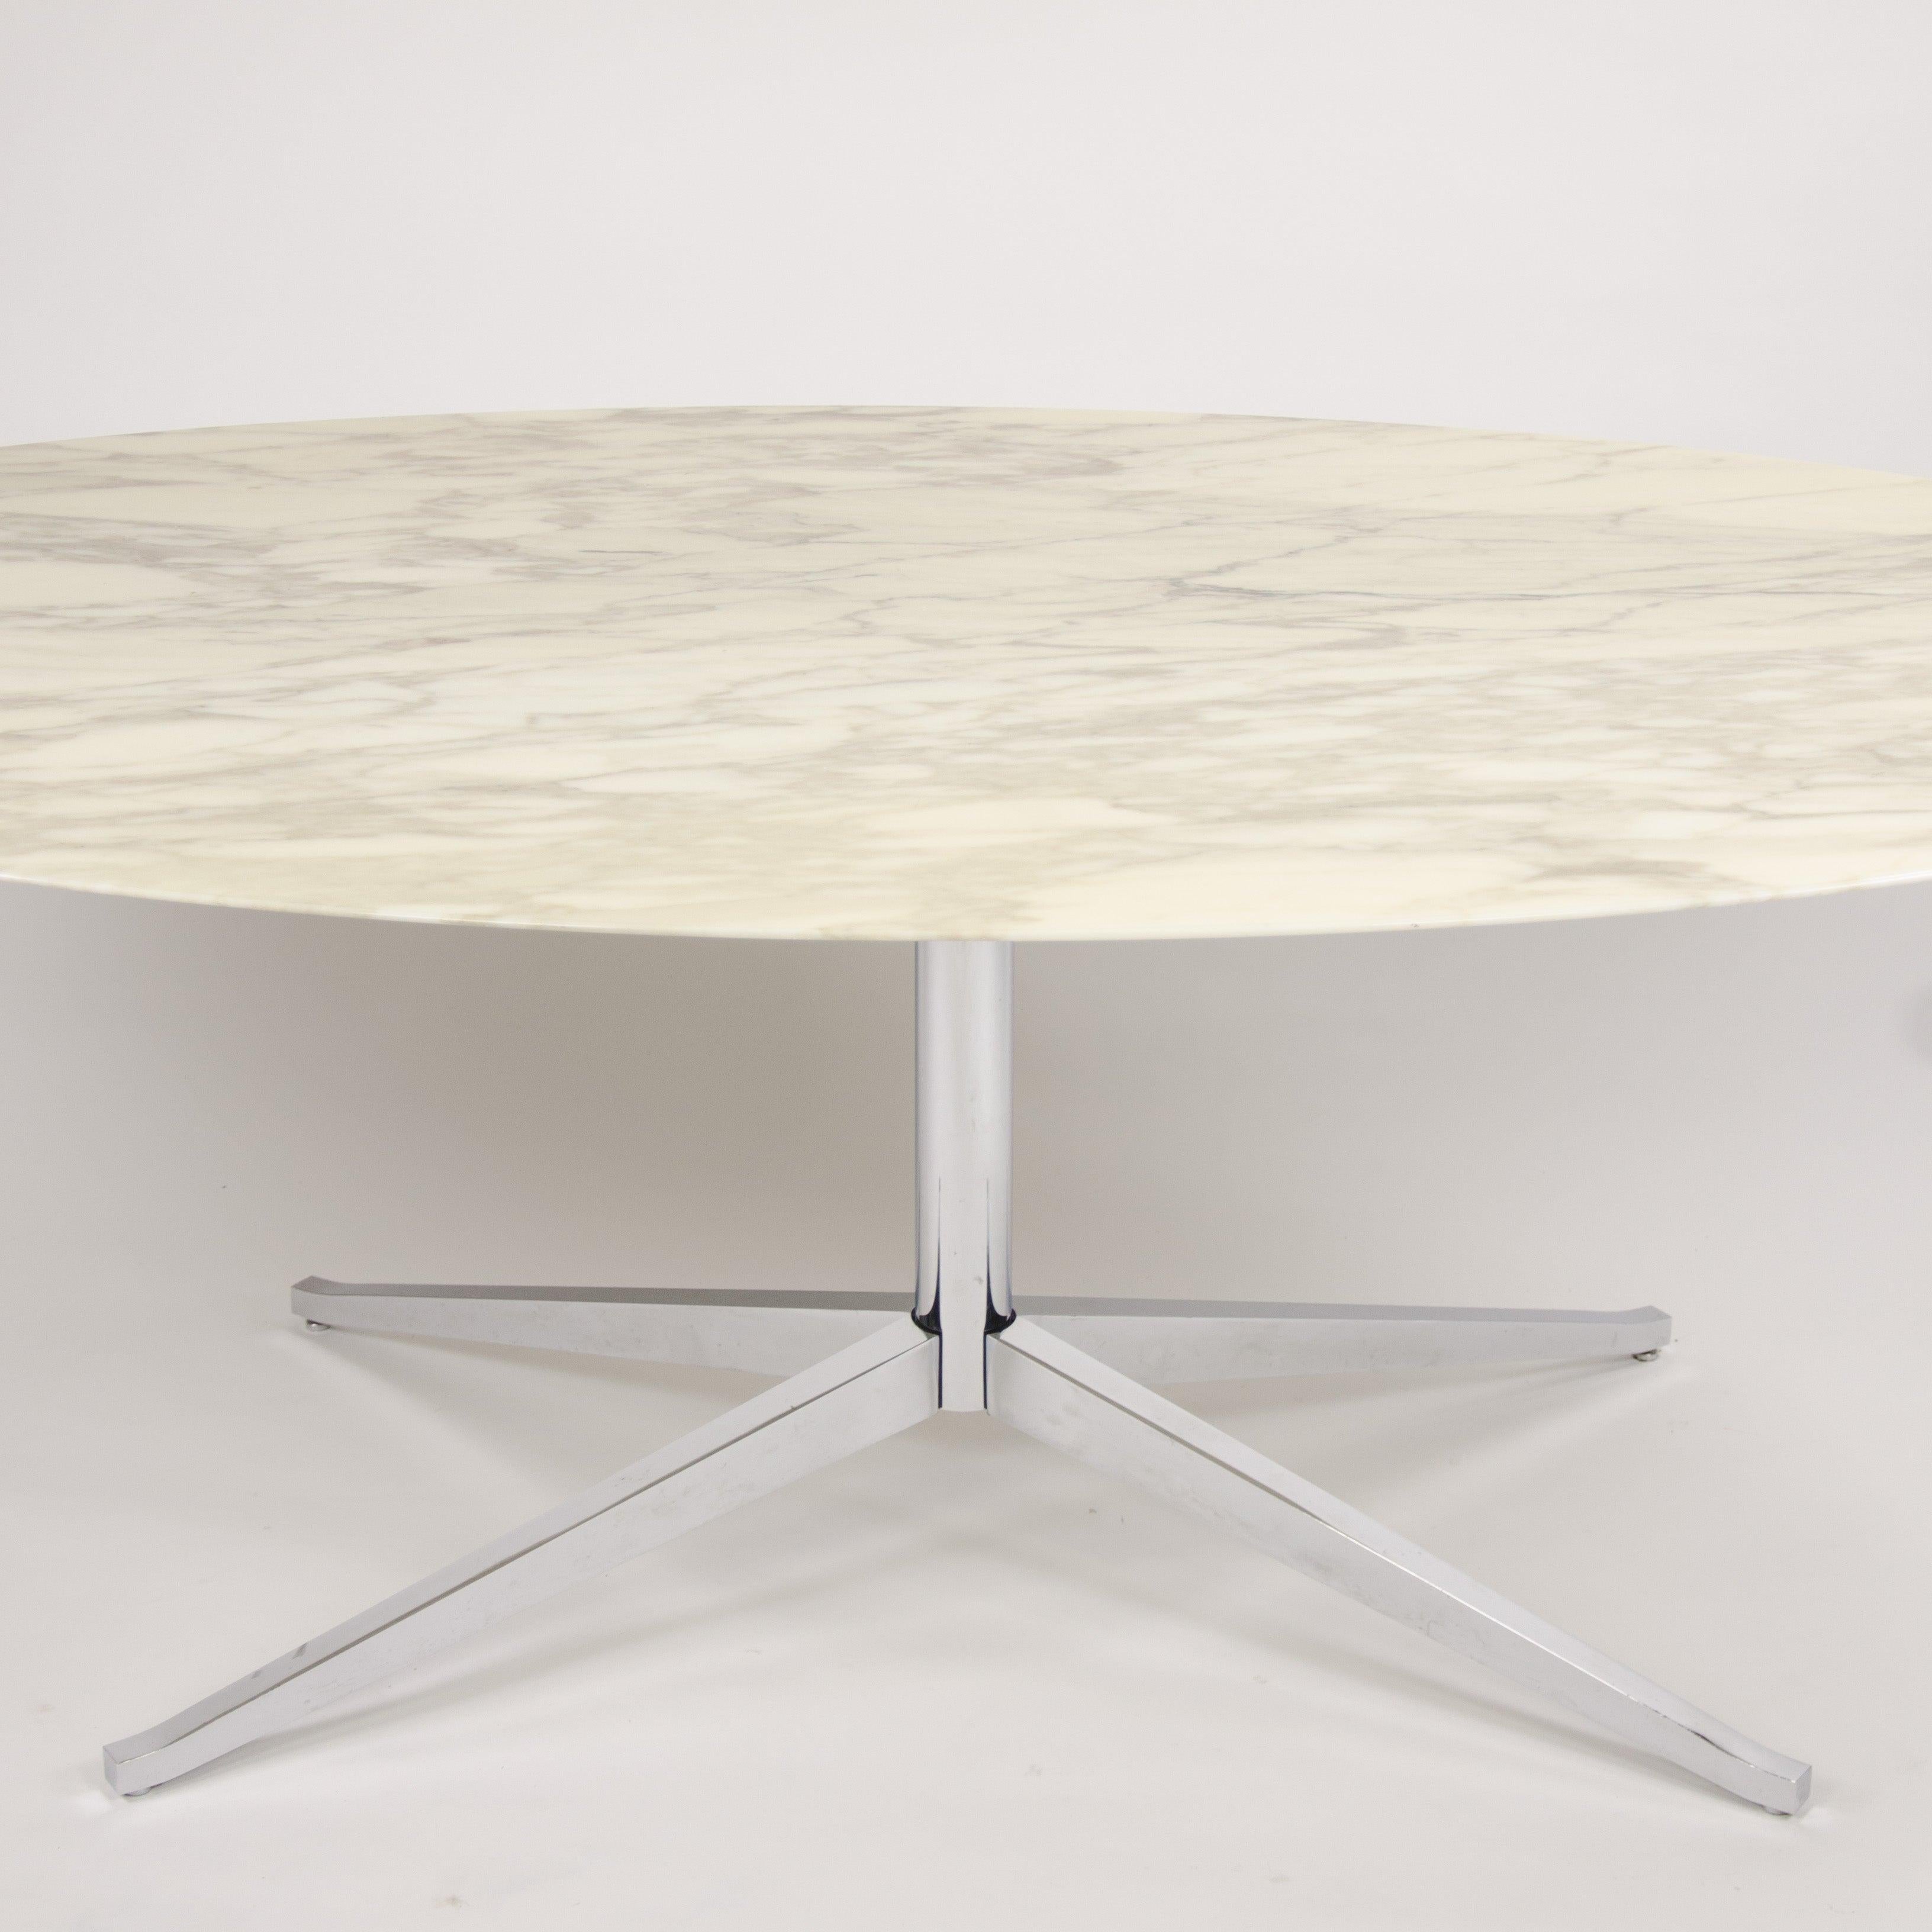 2007 Florence Knoll 78 in Calacatta Marble Dining Conference Table 2x Available In Good Condition For Sale In Philadelphia, PA